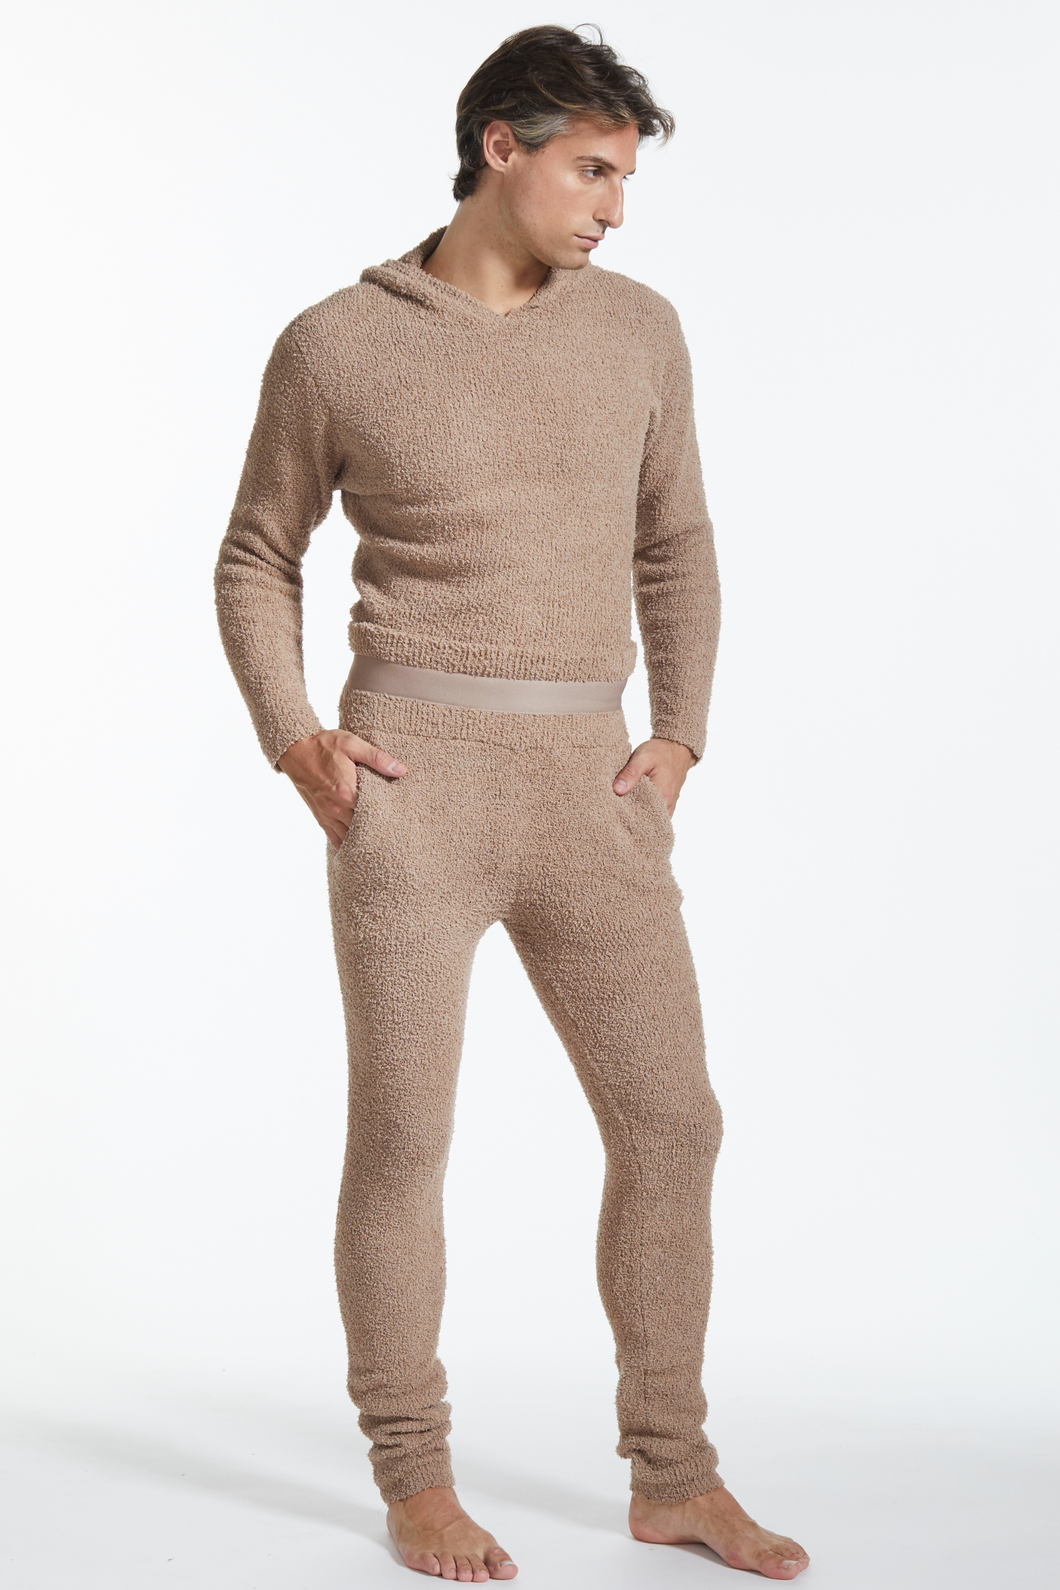 Essential Terrycloth High-Waisted Sweatpants - Tan